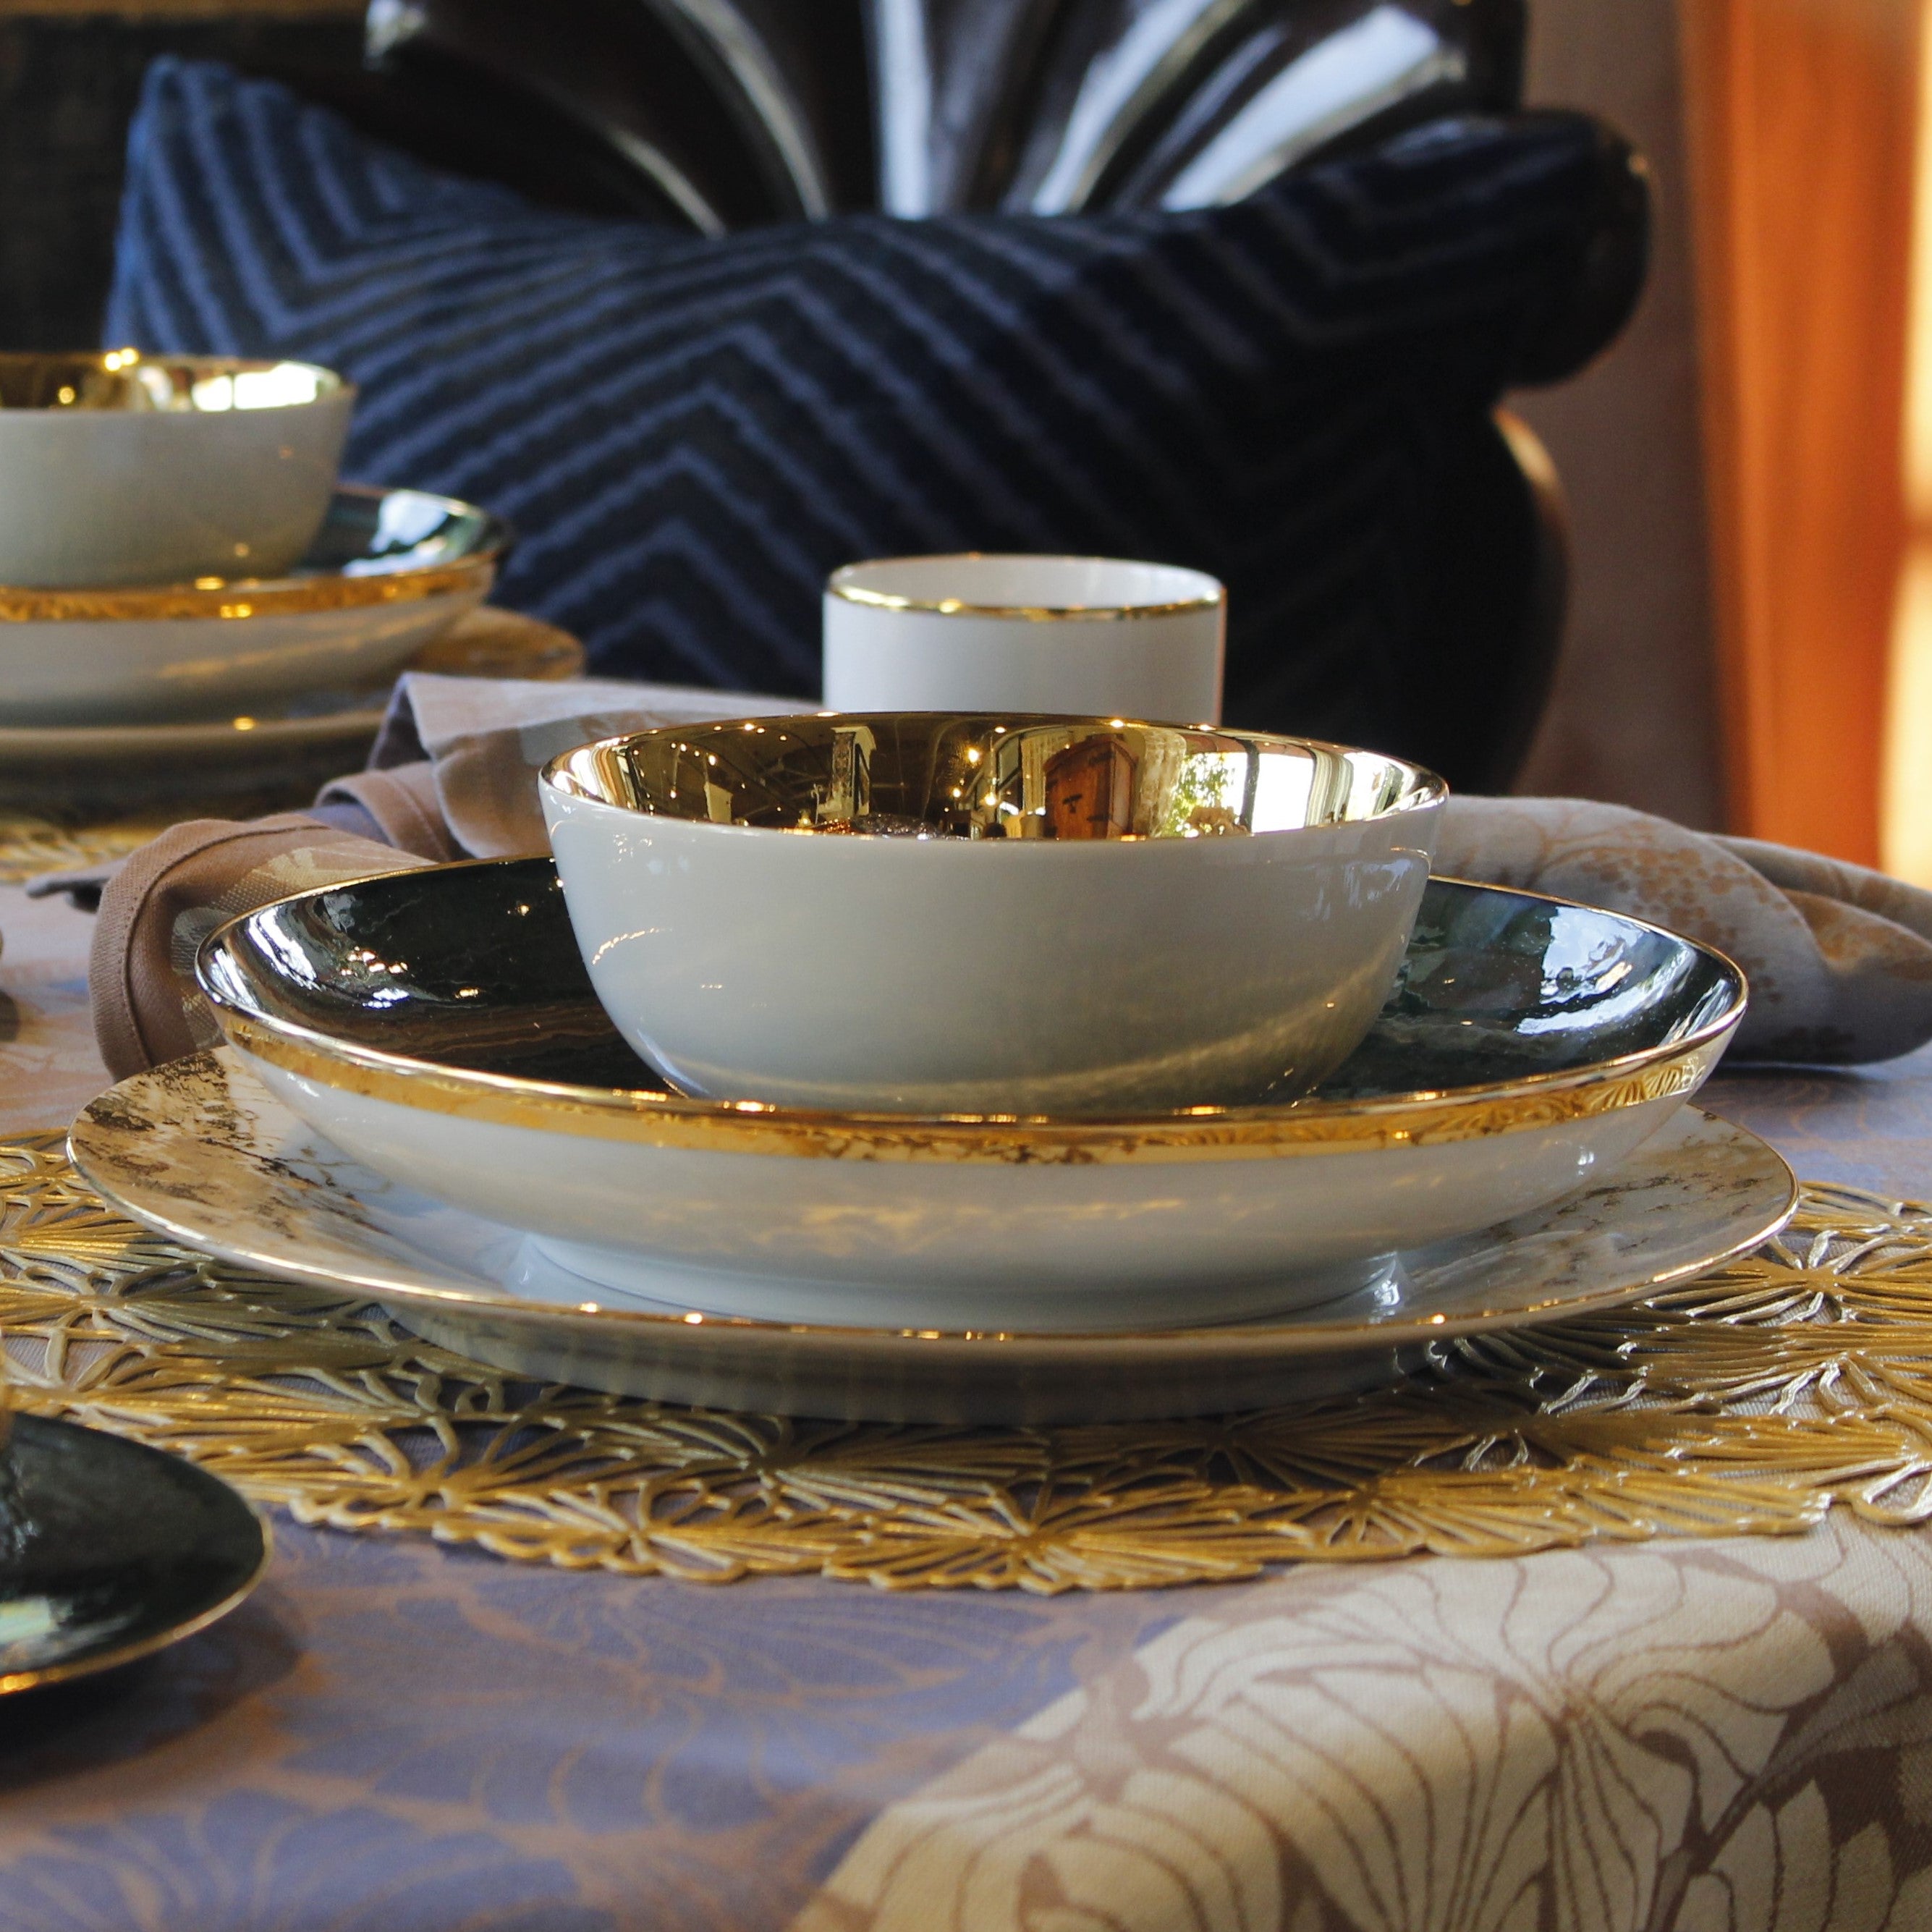 Gold accent bowl shown on table setting layered with a larger bowl and a plate underneath